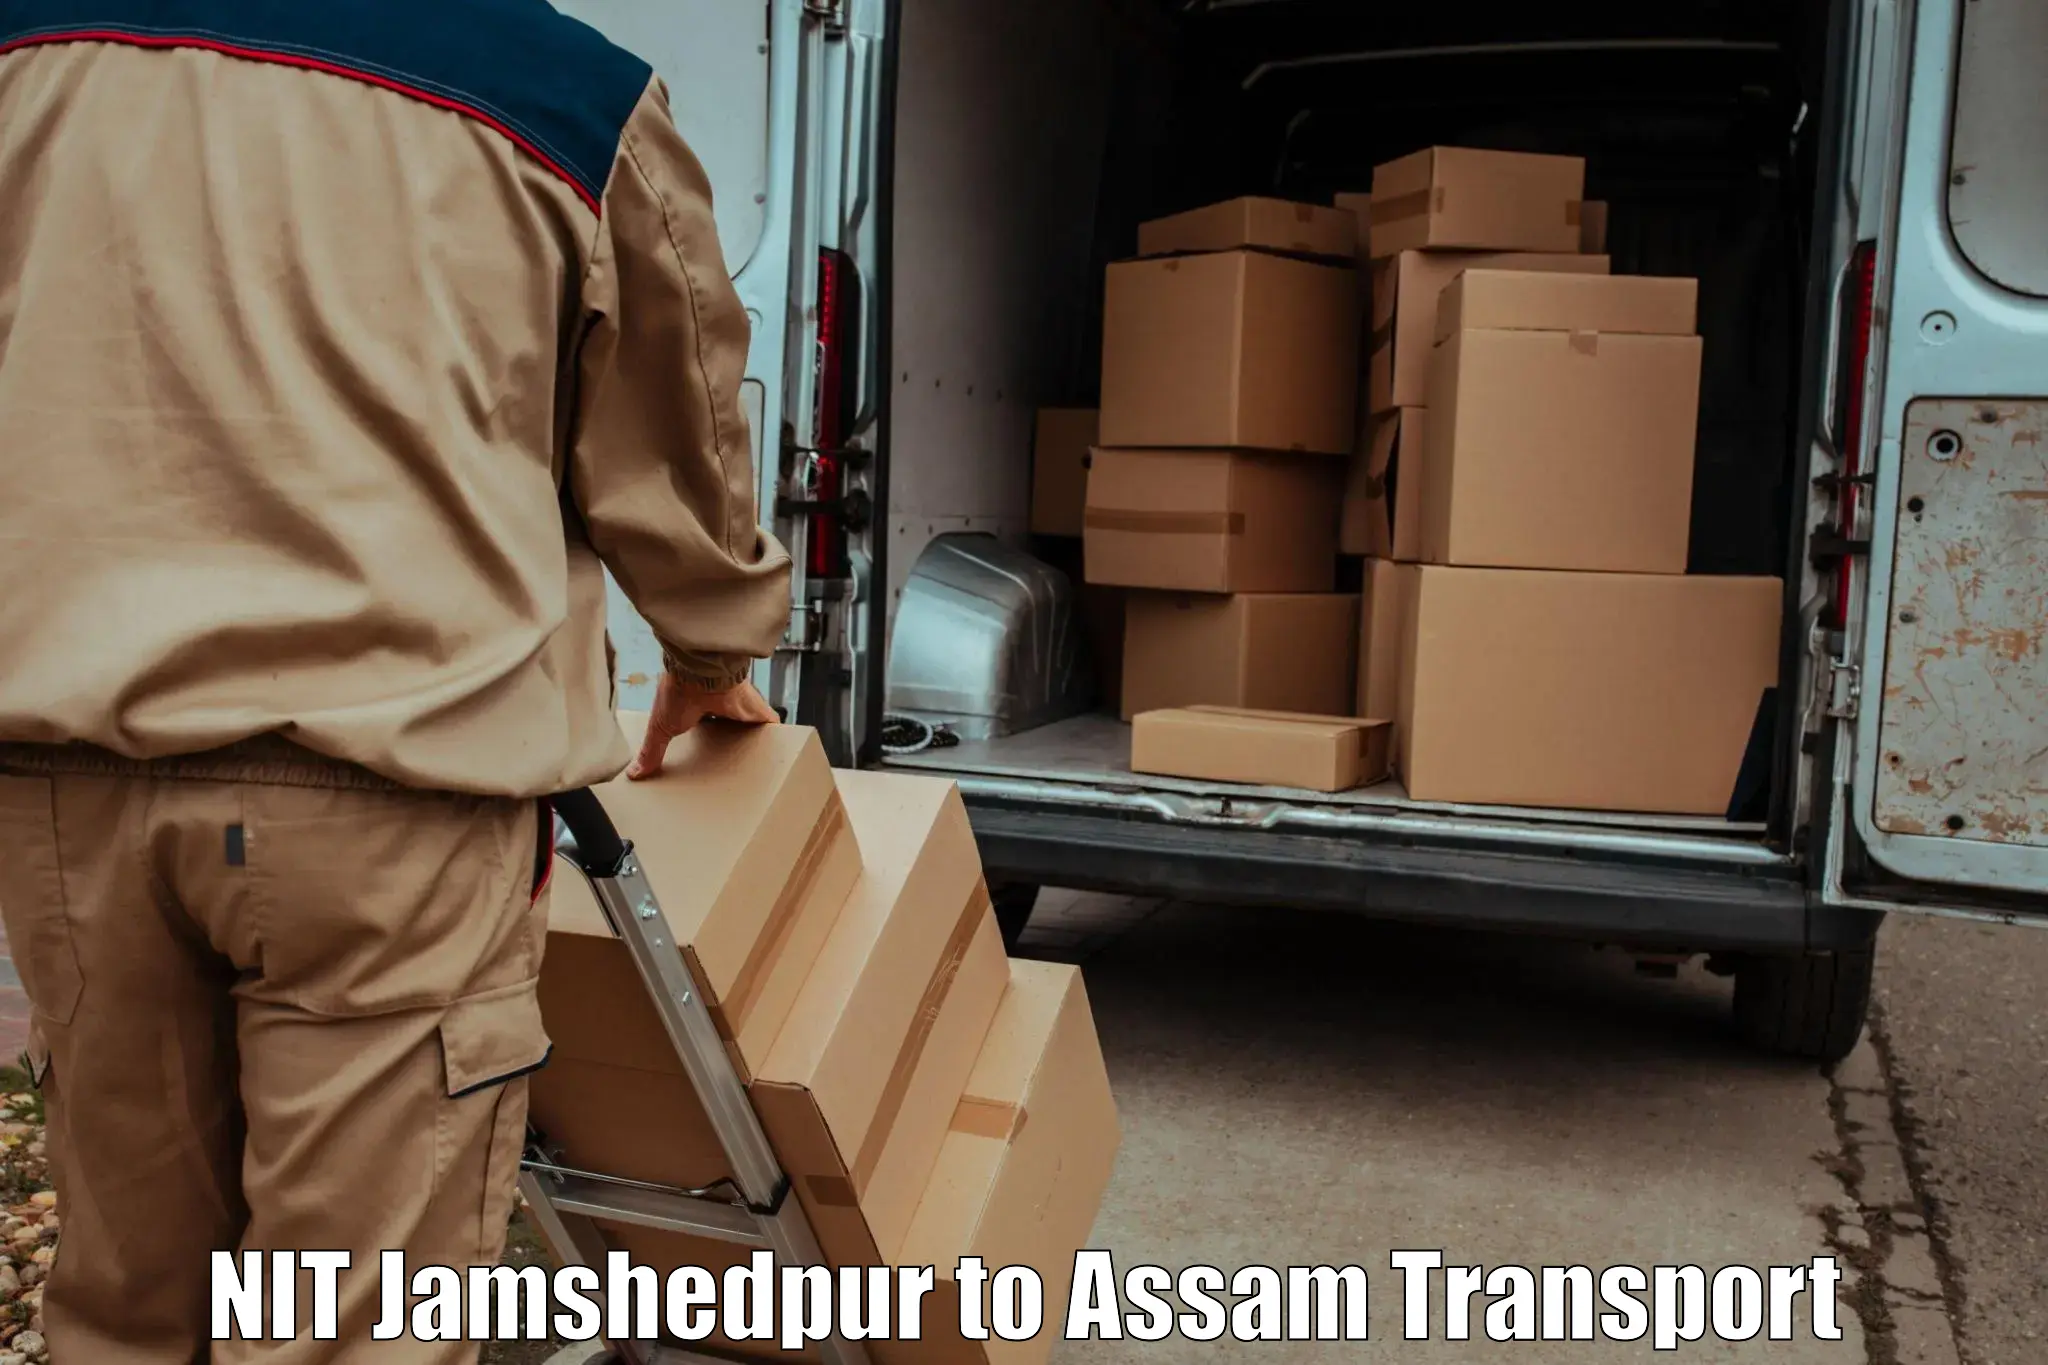 Nearby transport service NIT Jamshedpur to Rowta